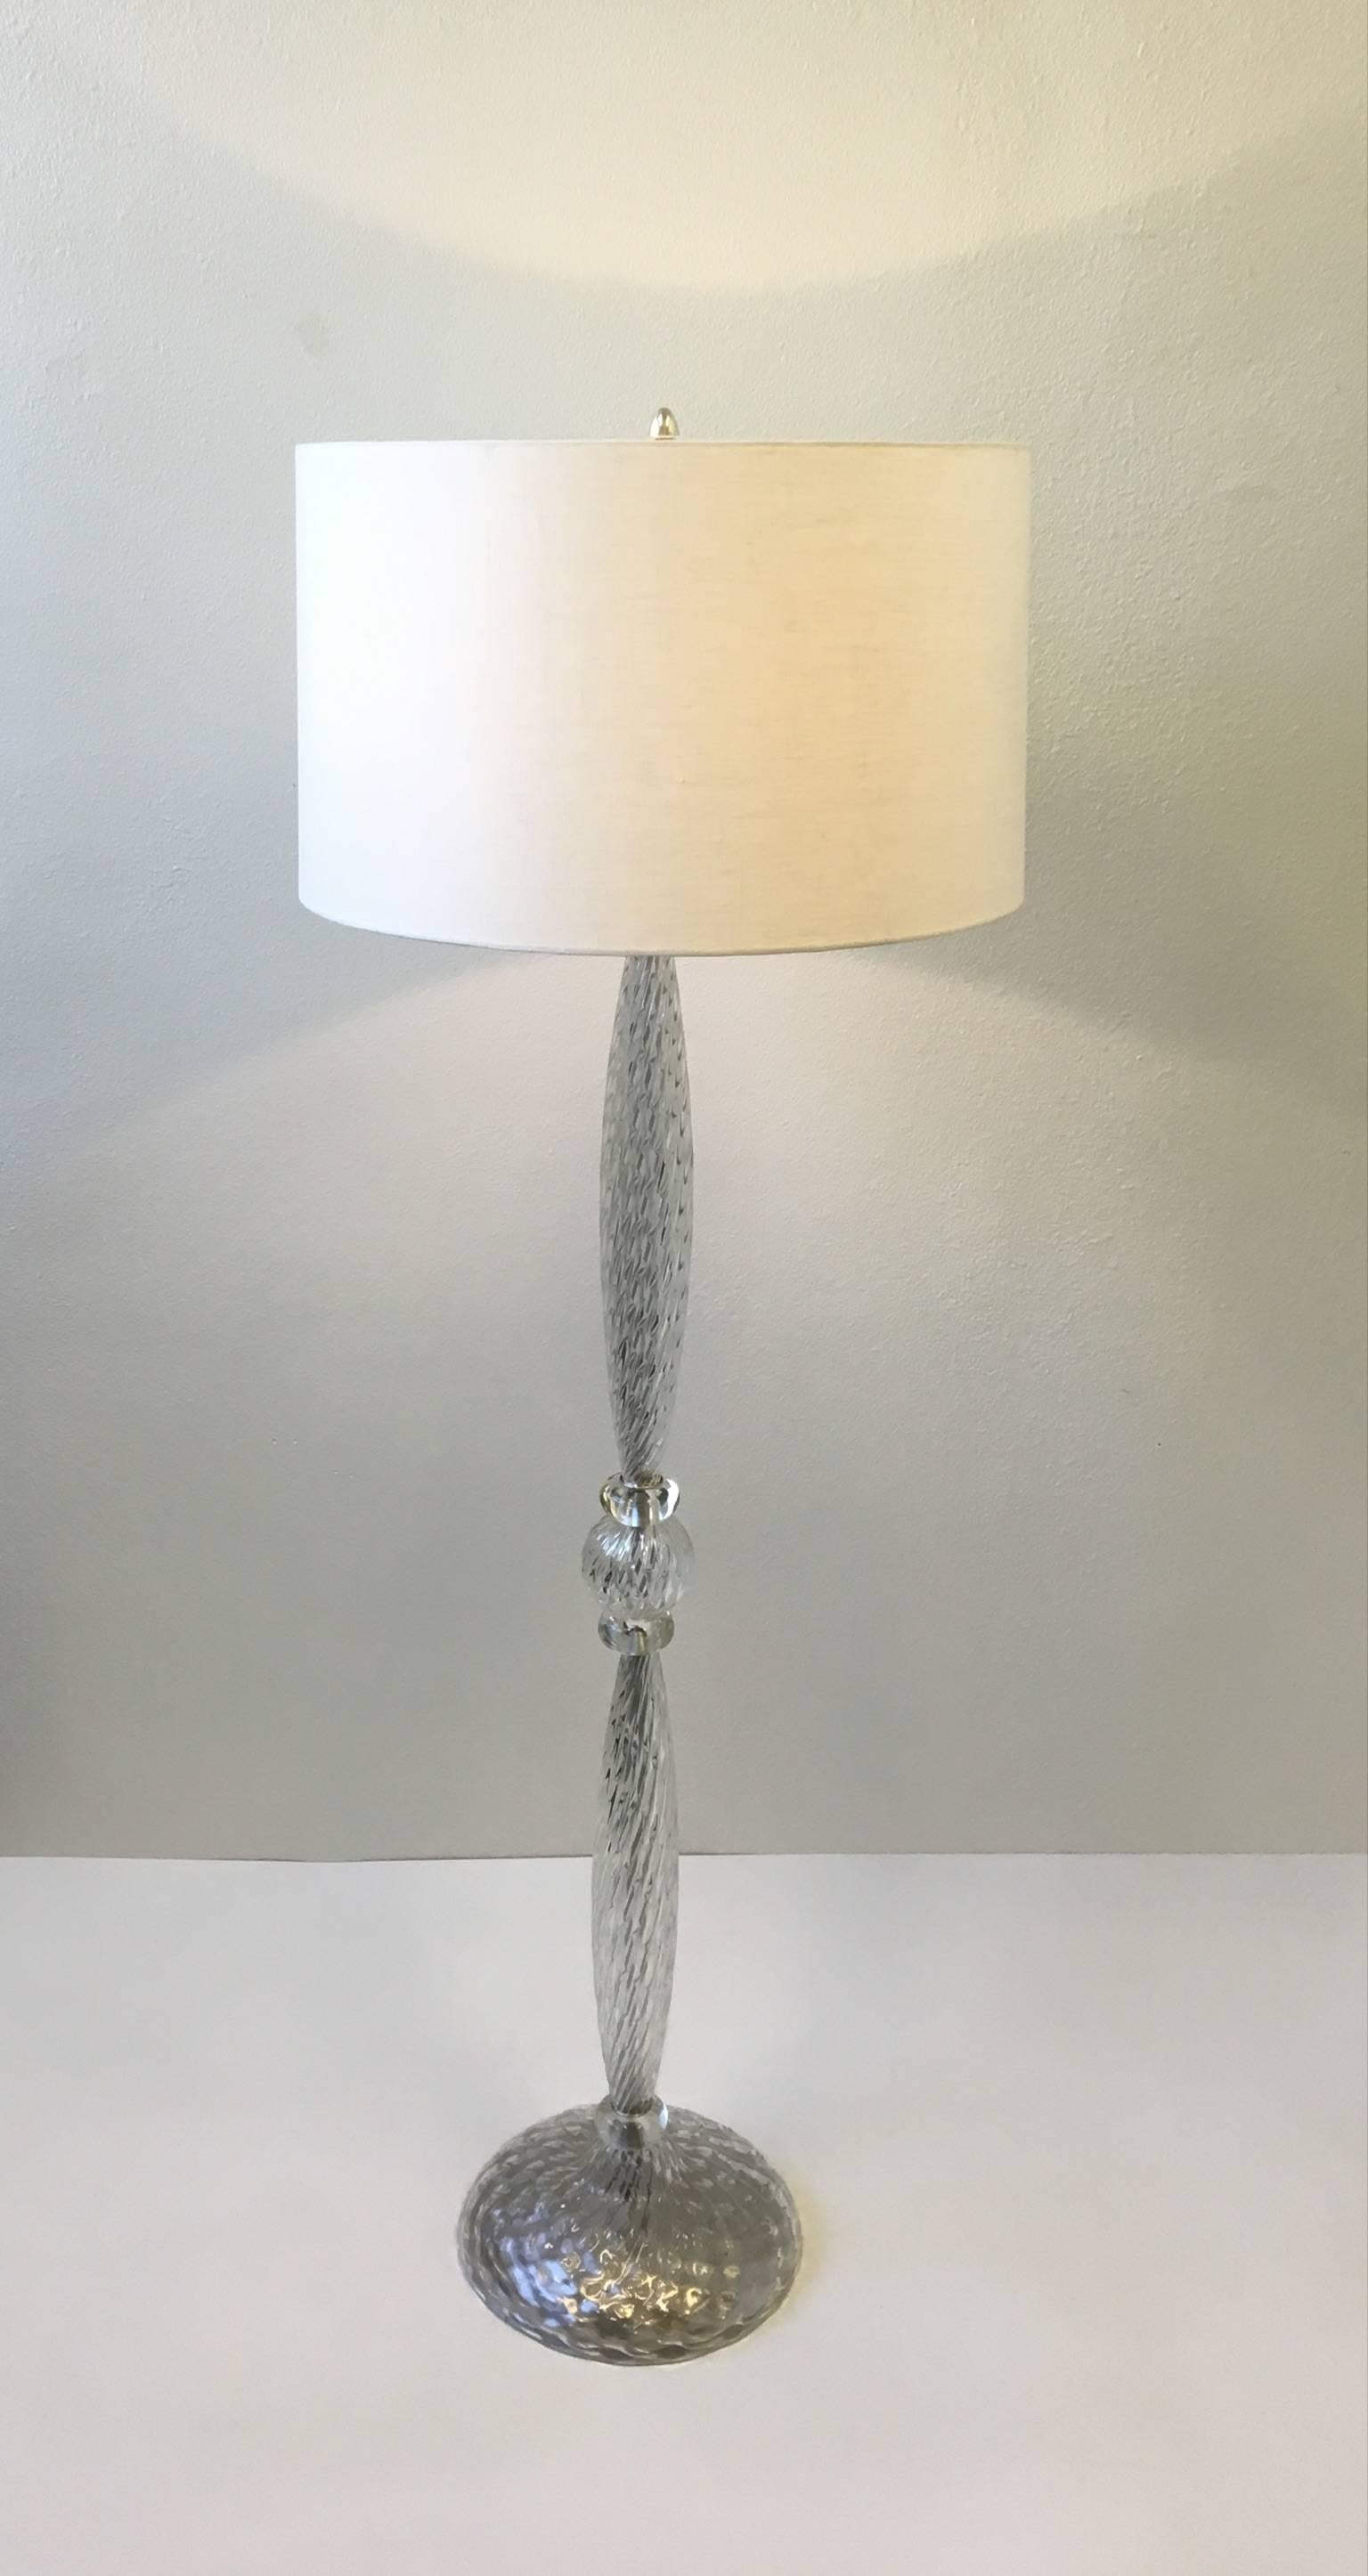 Mid-Century Modern Murano Glass and Silver Floor Lamp by Venini for Marbro Lamps Co.